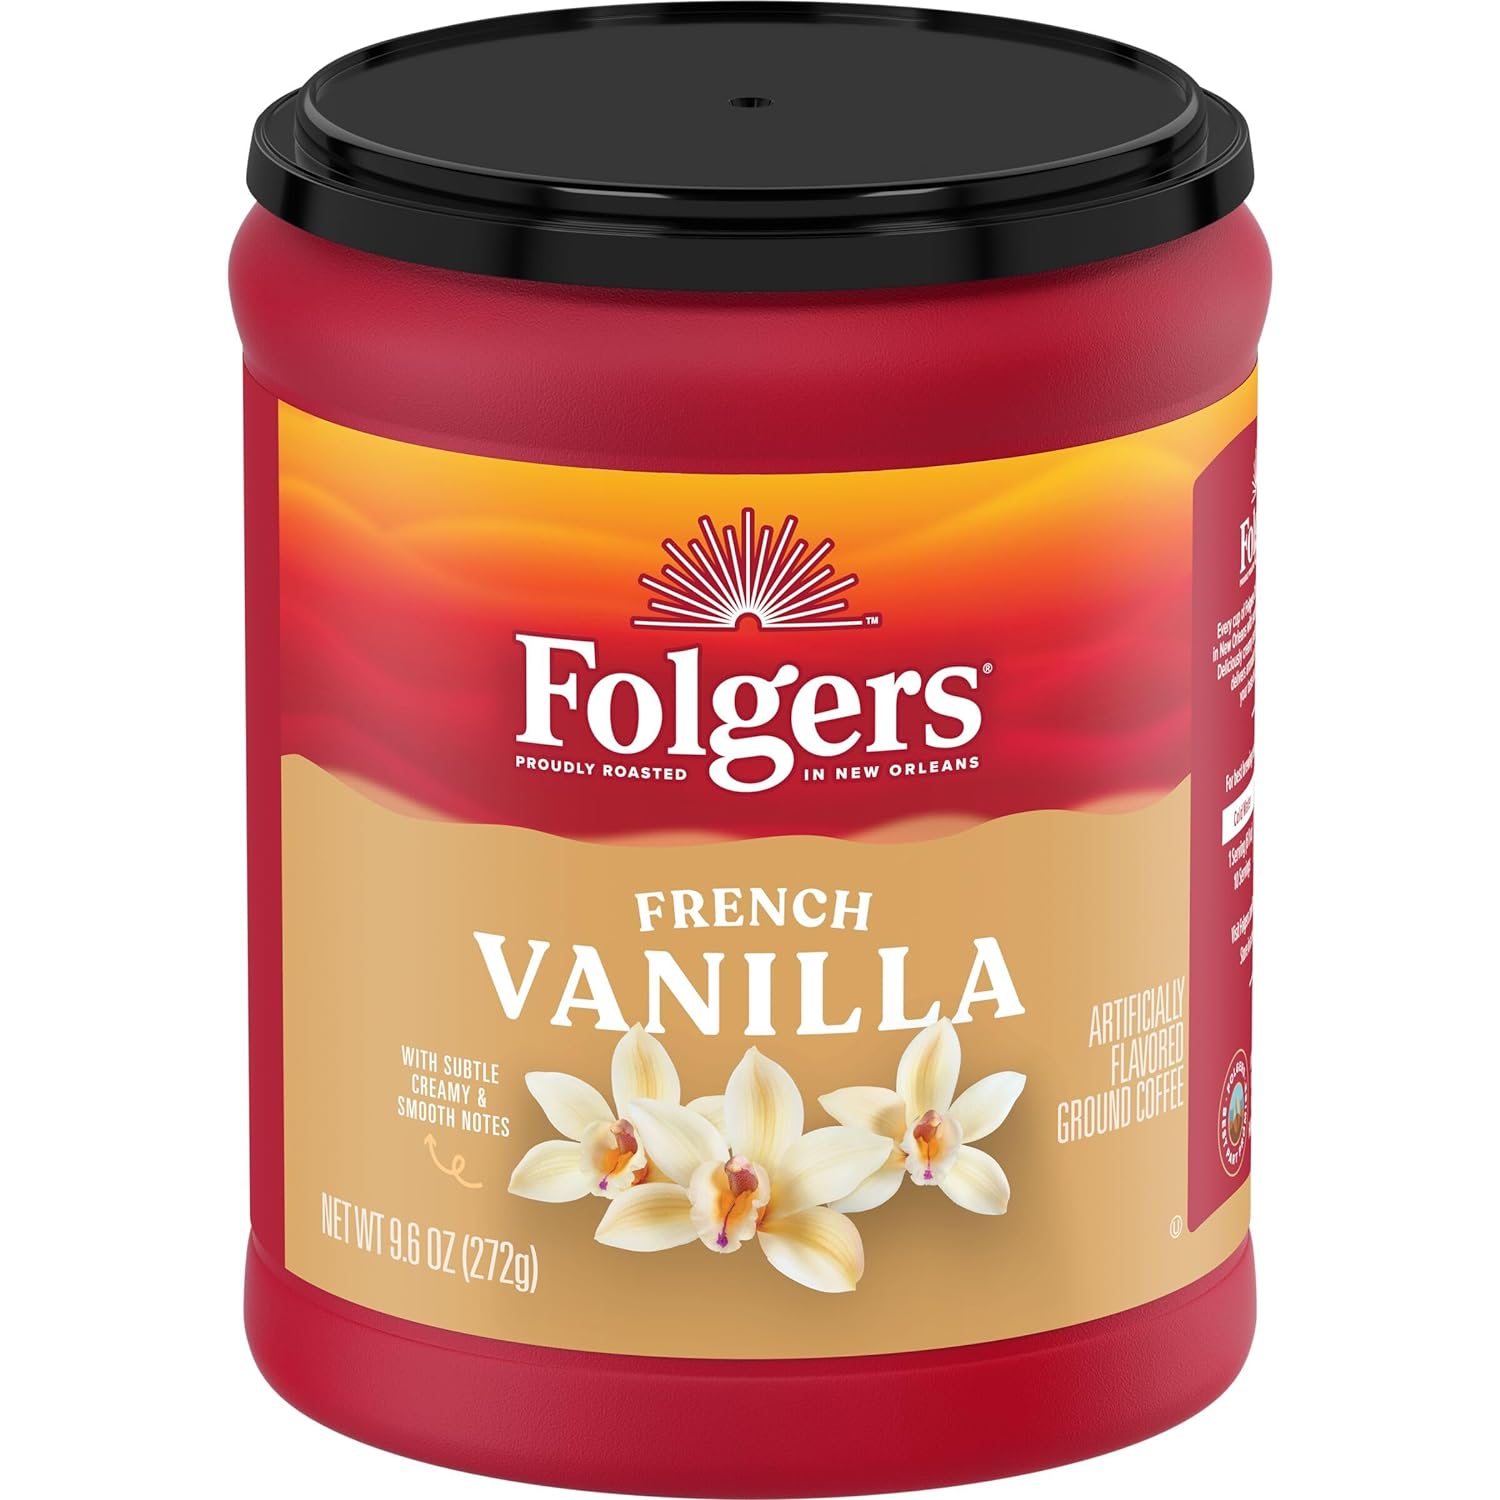 Folgers French Vanilla Flavored Ground Coffee, 9.6 Ounce Canister (Pack of 6)